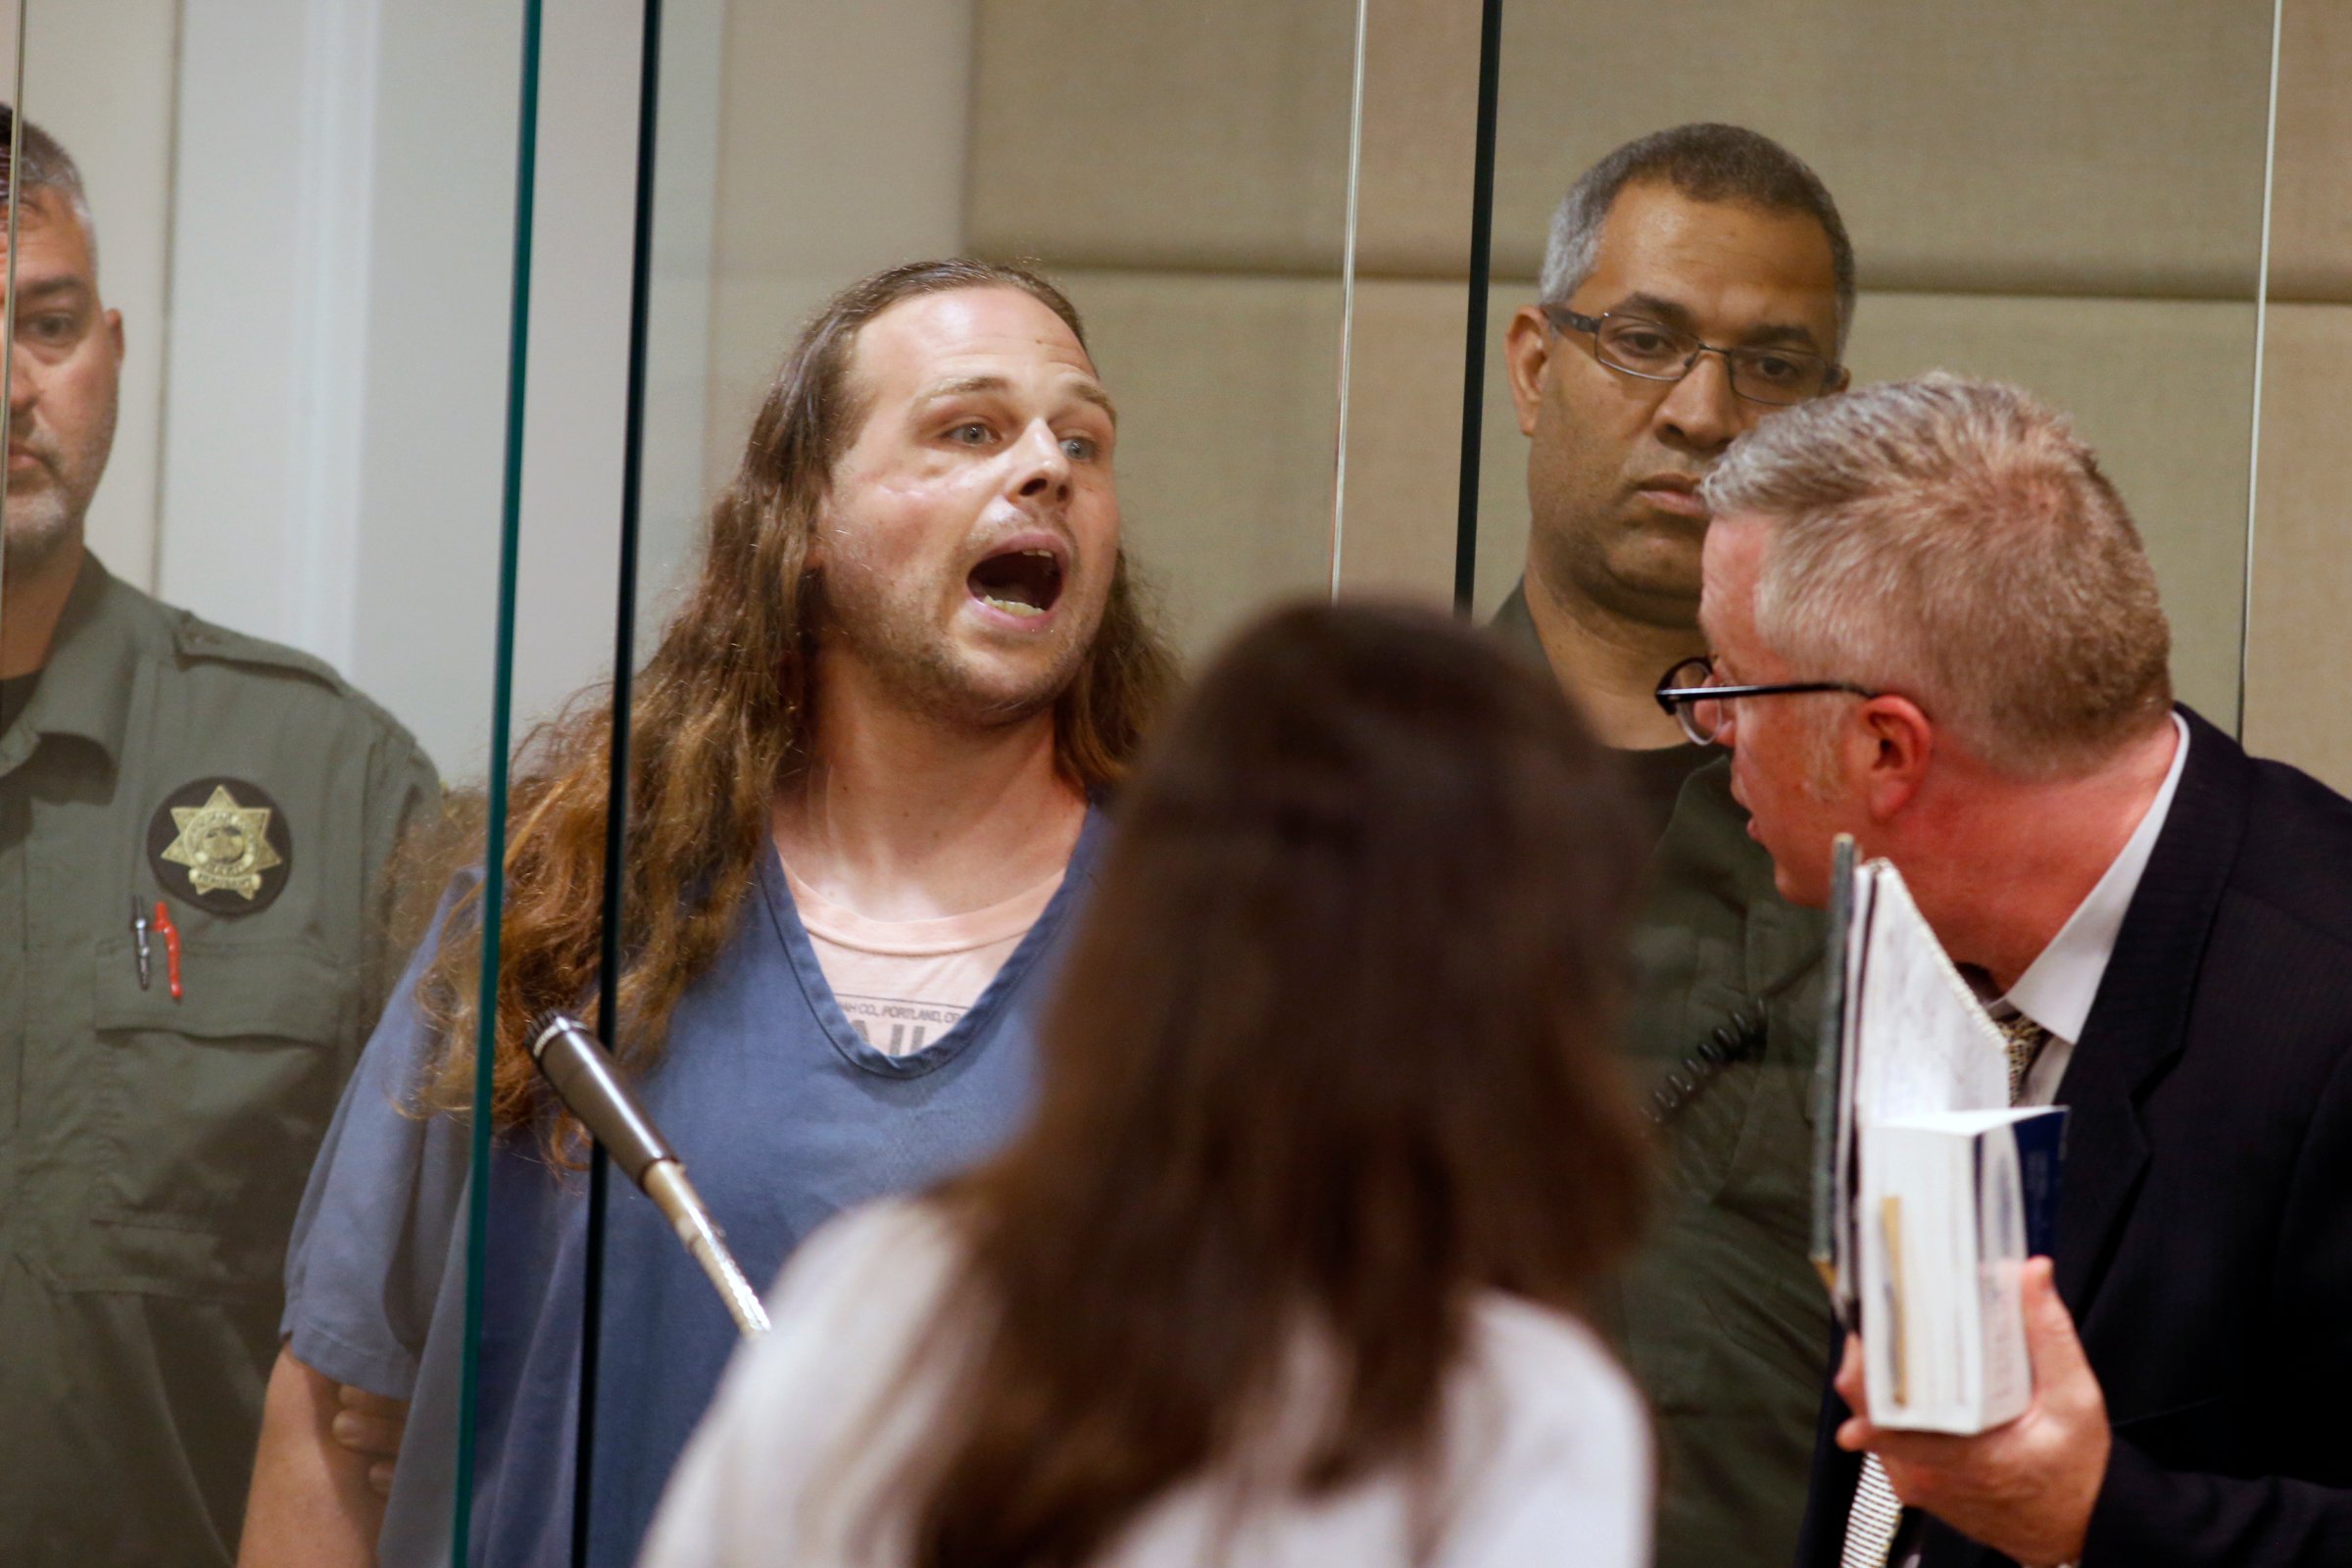 Jeremy Joseph Christian shouts as he is arraigned in Multnomah County Circuit Court in Portland, Ore., Tuesday, May 30, 2017. Authorities say Christian started verbally abusing two young women, including one wearing a hijab. When three men on the train intervened, police say, Christian attacked them, killing two and wounding one.